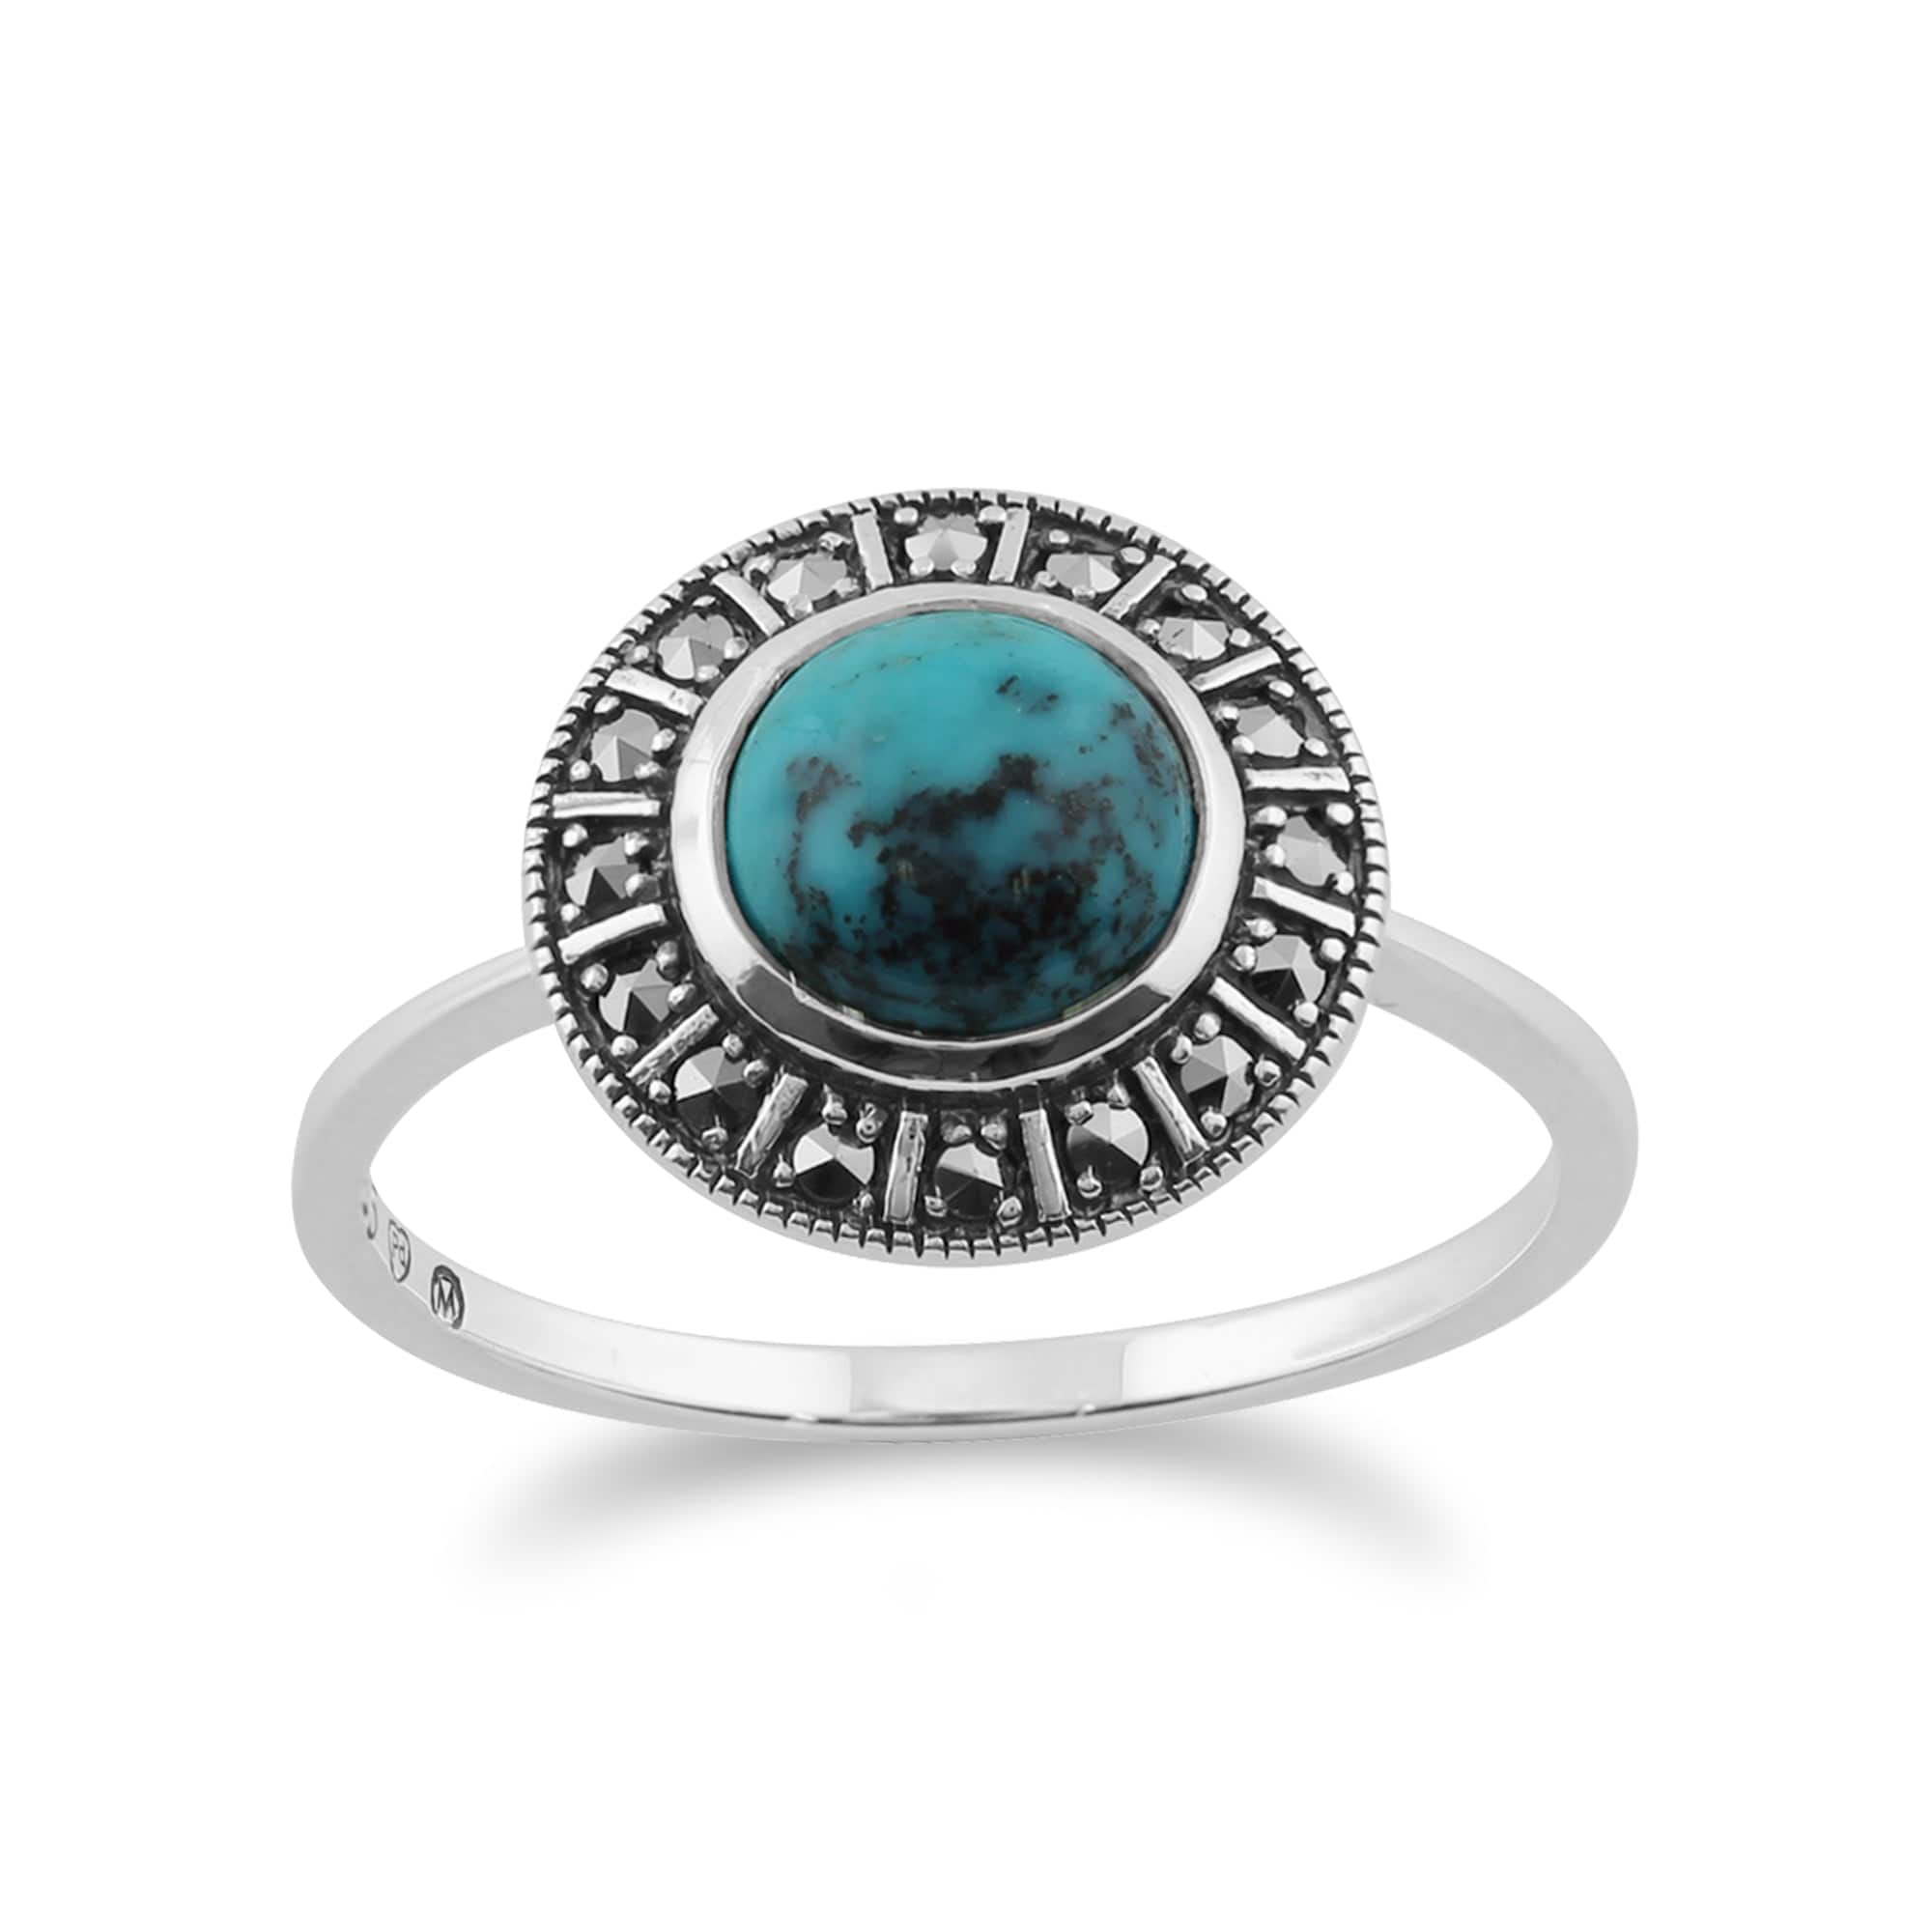 Art Deco Style Round Turquoise Cabochon & Marcasite Halo Ring in 925 Sterling Silver - Gemondo